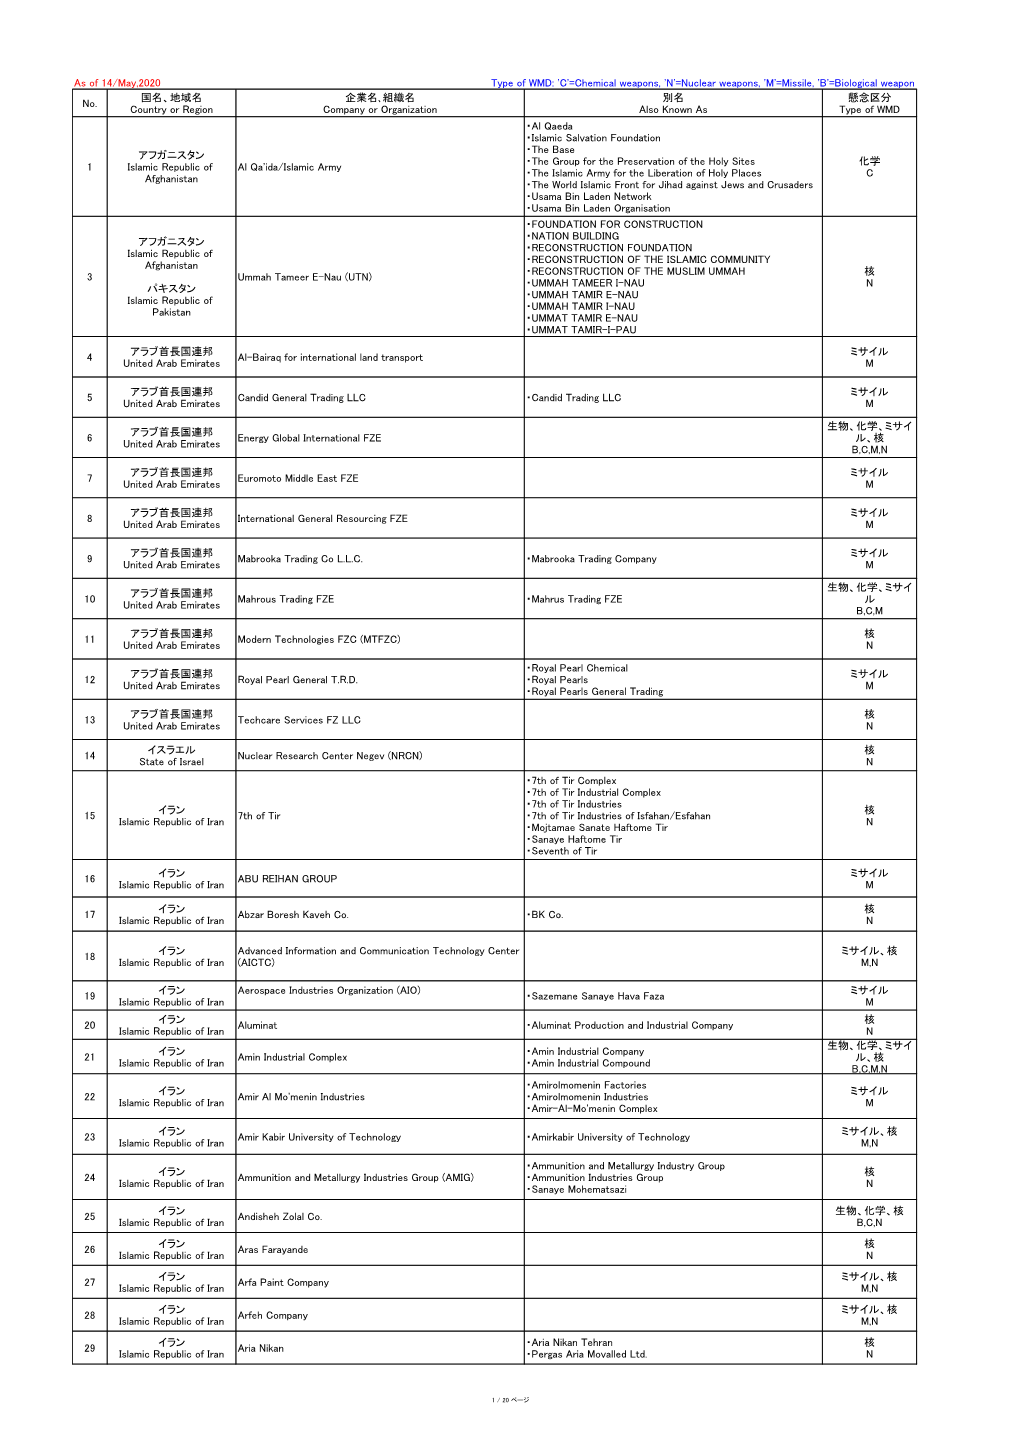 Appendix 2: List of Entities Or Individuals on Japan's Entities Of